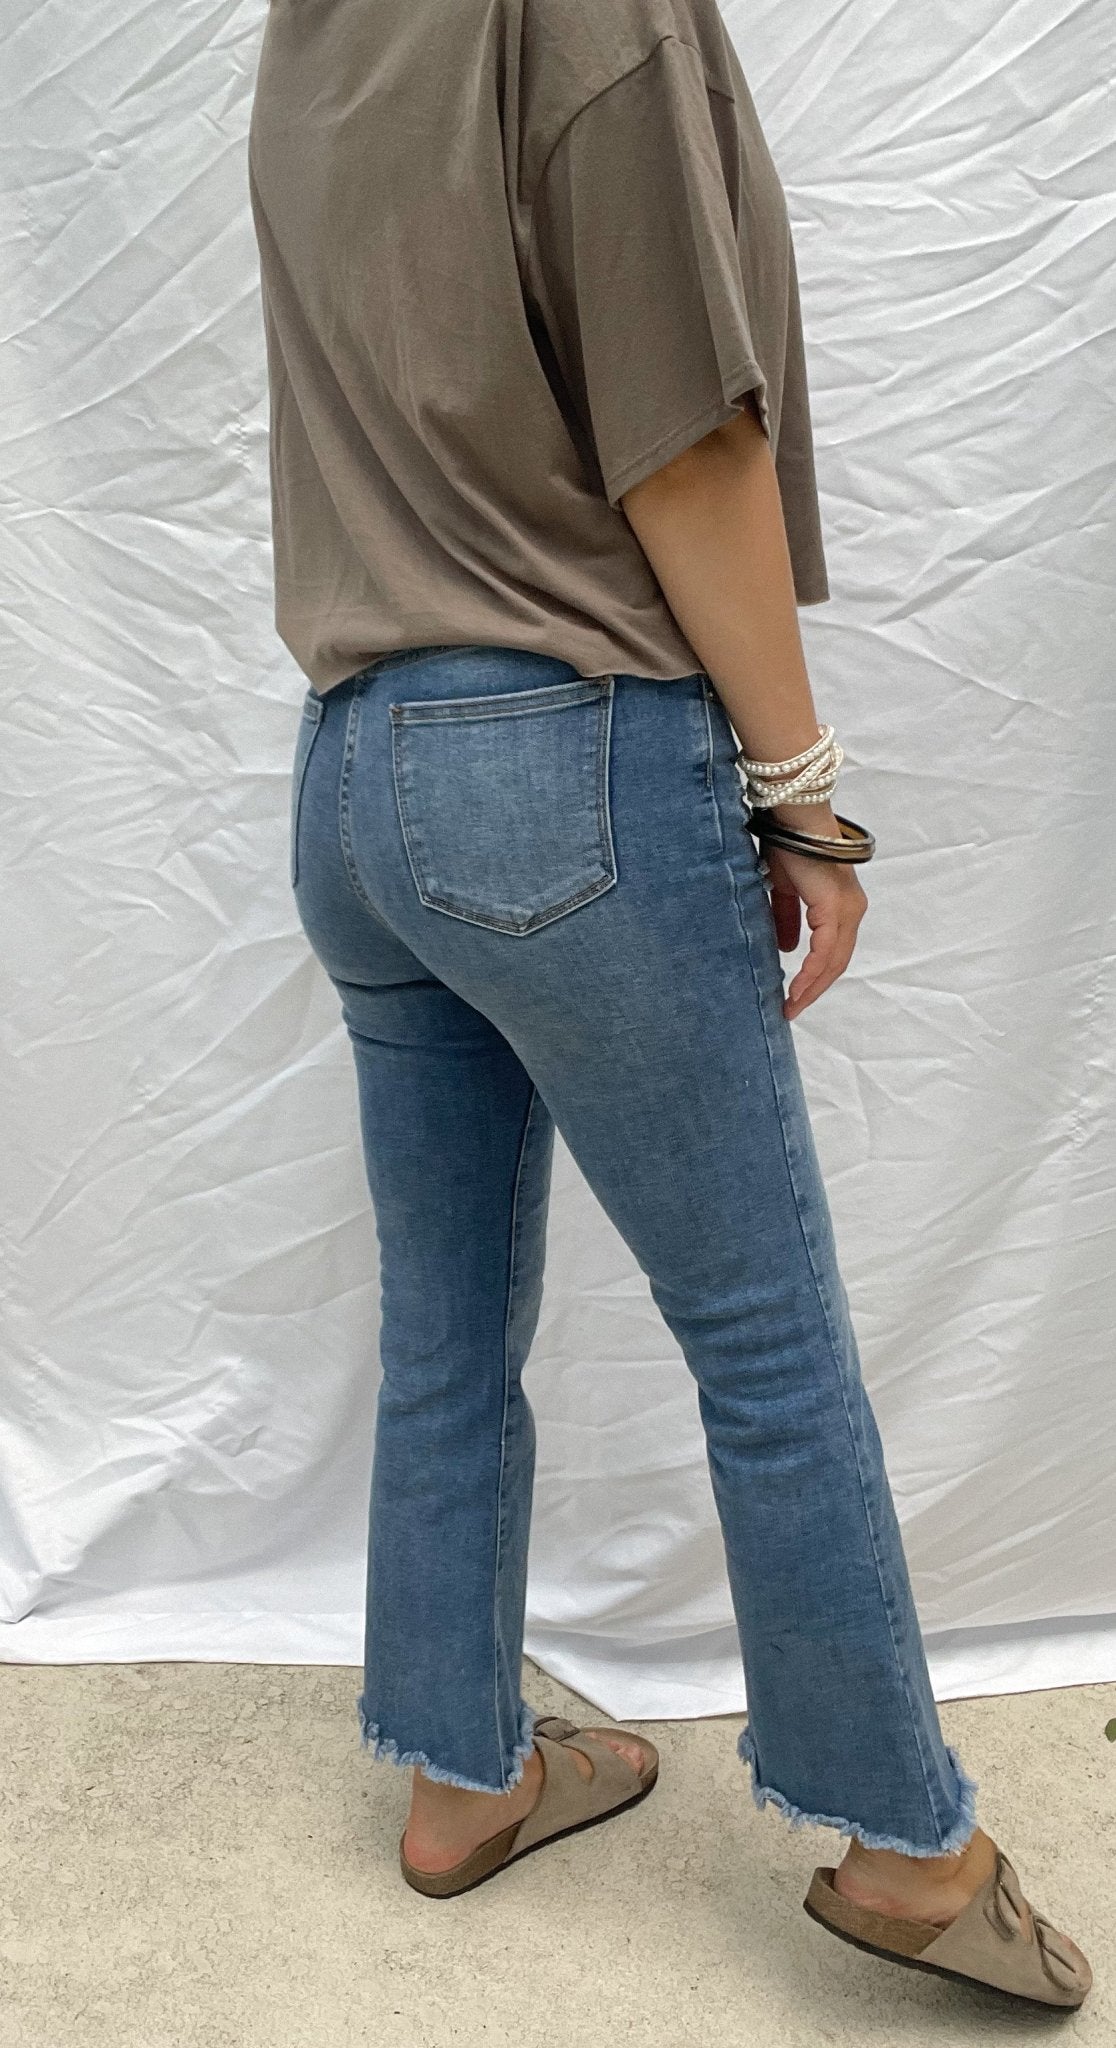 These Are The Days Crop Flare Jeans - Shop AffairBottoms45580529